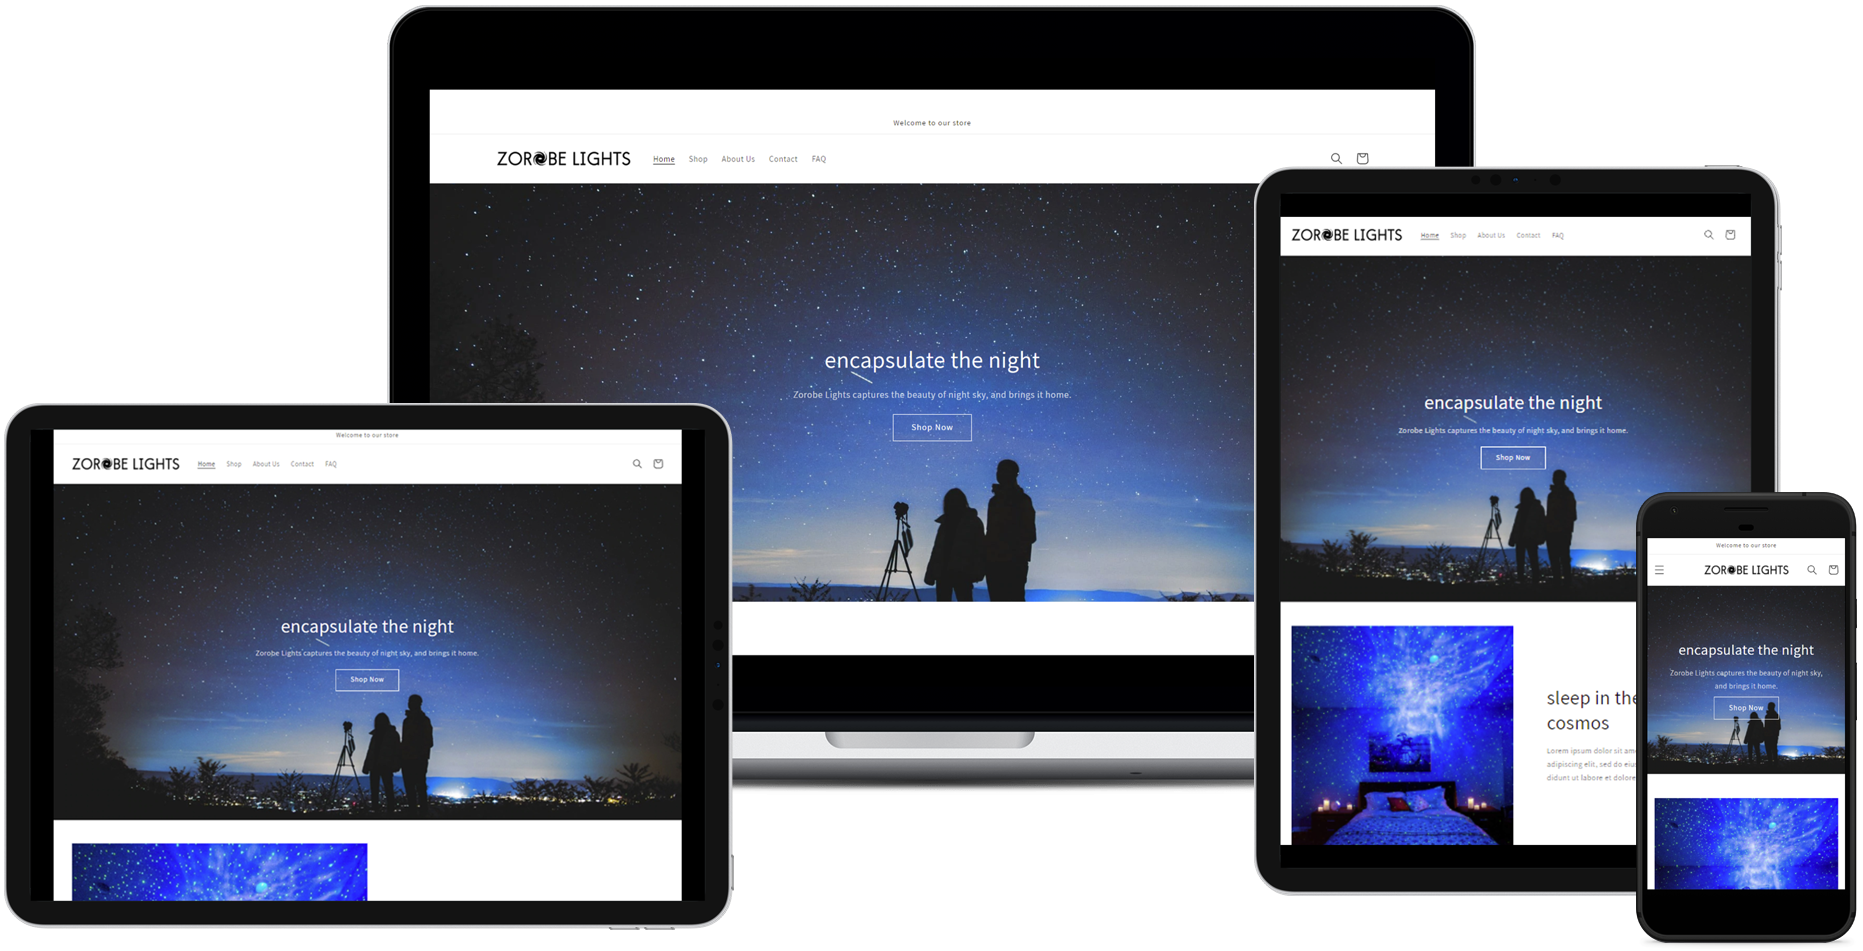 Landing page for Zorobe Lights Shopify Store displayed on four devices; in order from left to right: Ipad Pro in landscape orientation, 13-inch Macbook Pro, Ipad Pro in portrait orentation, Google Pixel 2.